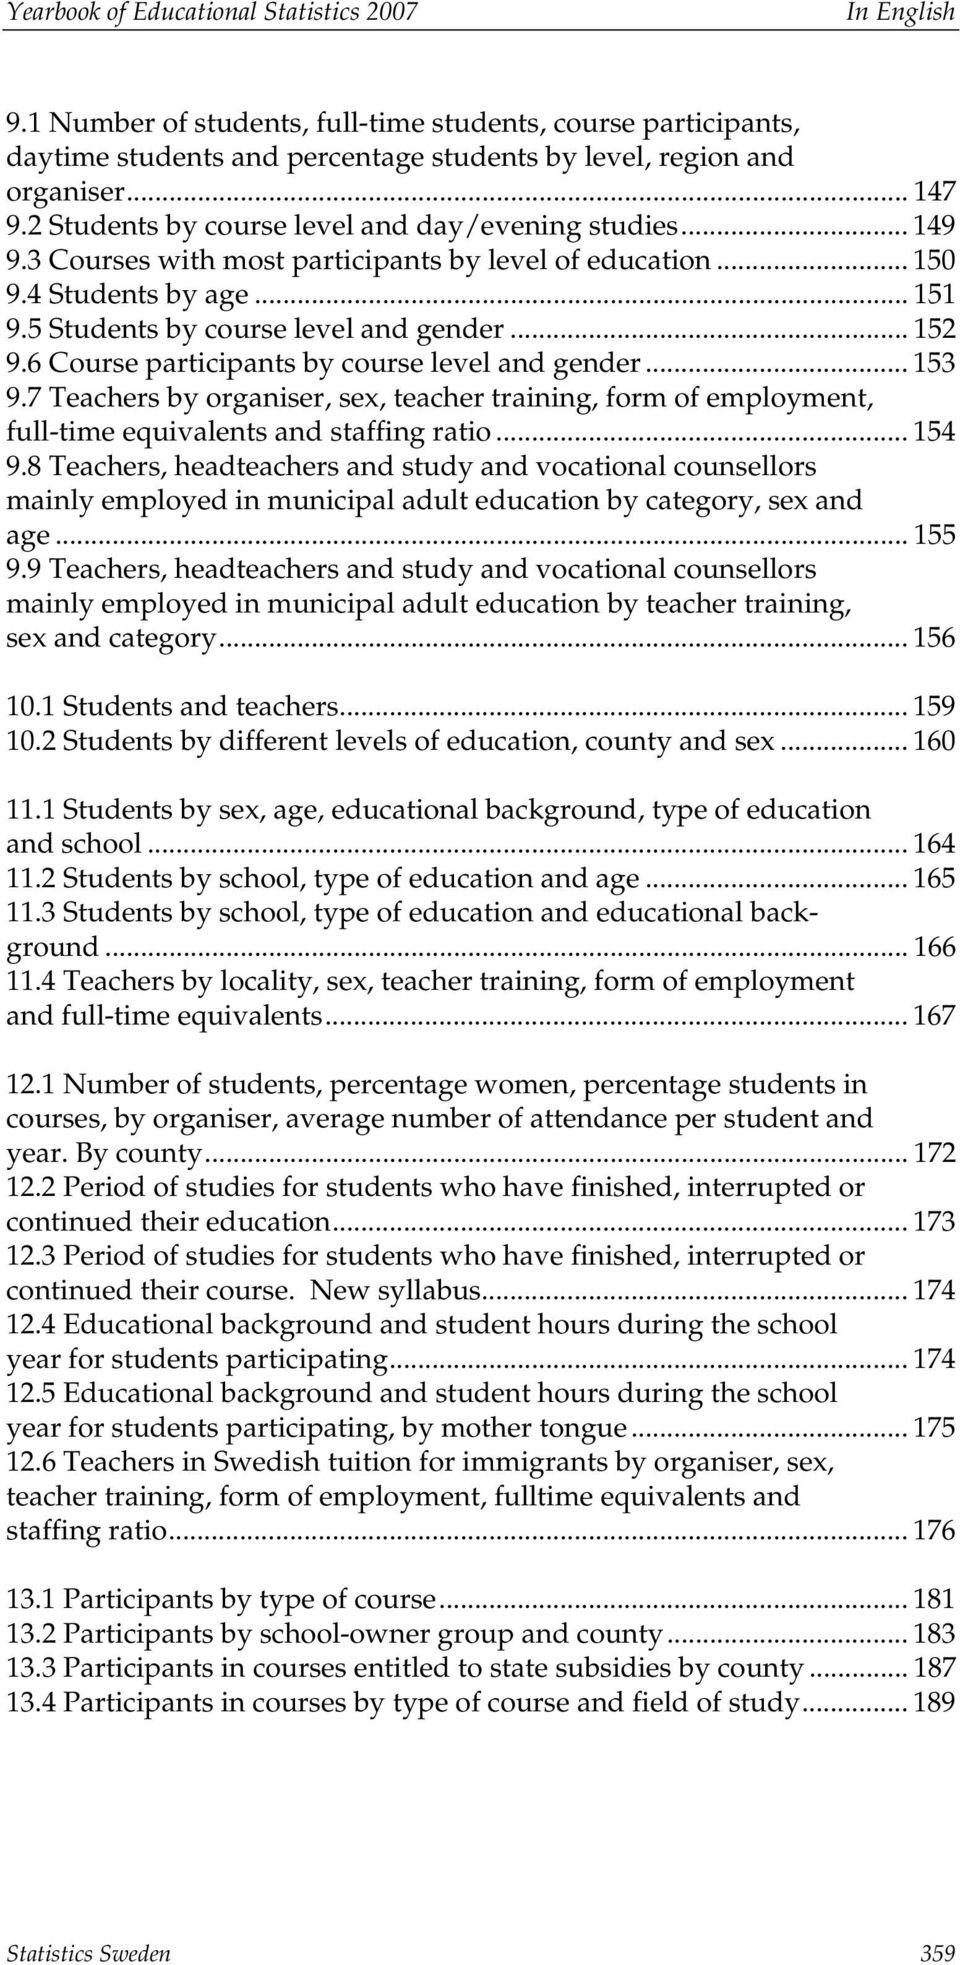 6 Course participants by course level and gender... 153 9.7 Teachers by organiser, sex, teacher training, form of employment, full-time equivalents and staffing ratio... 154 9.